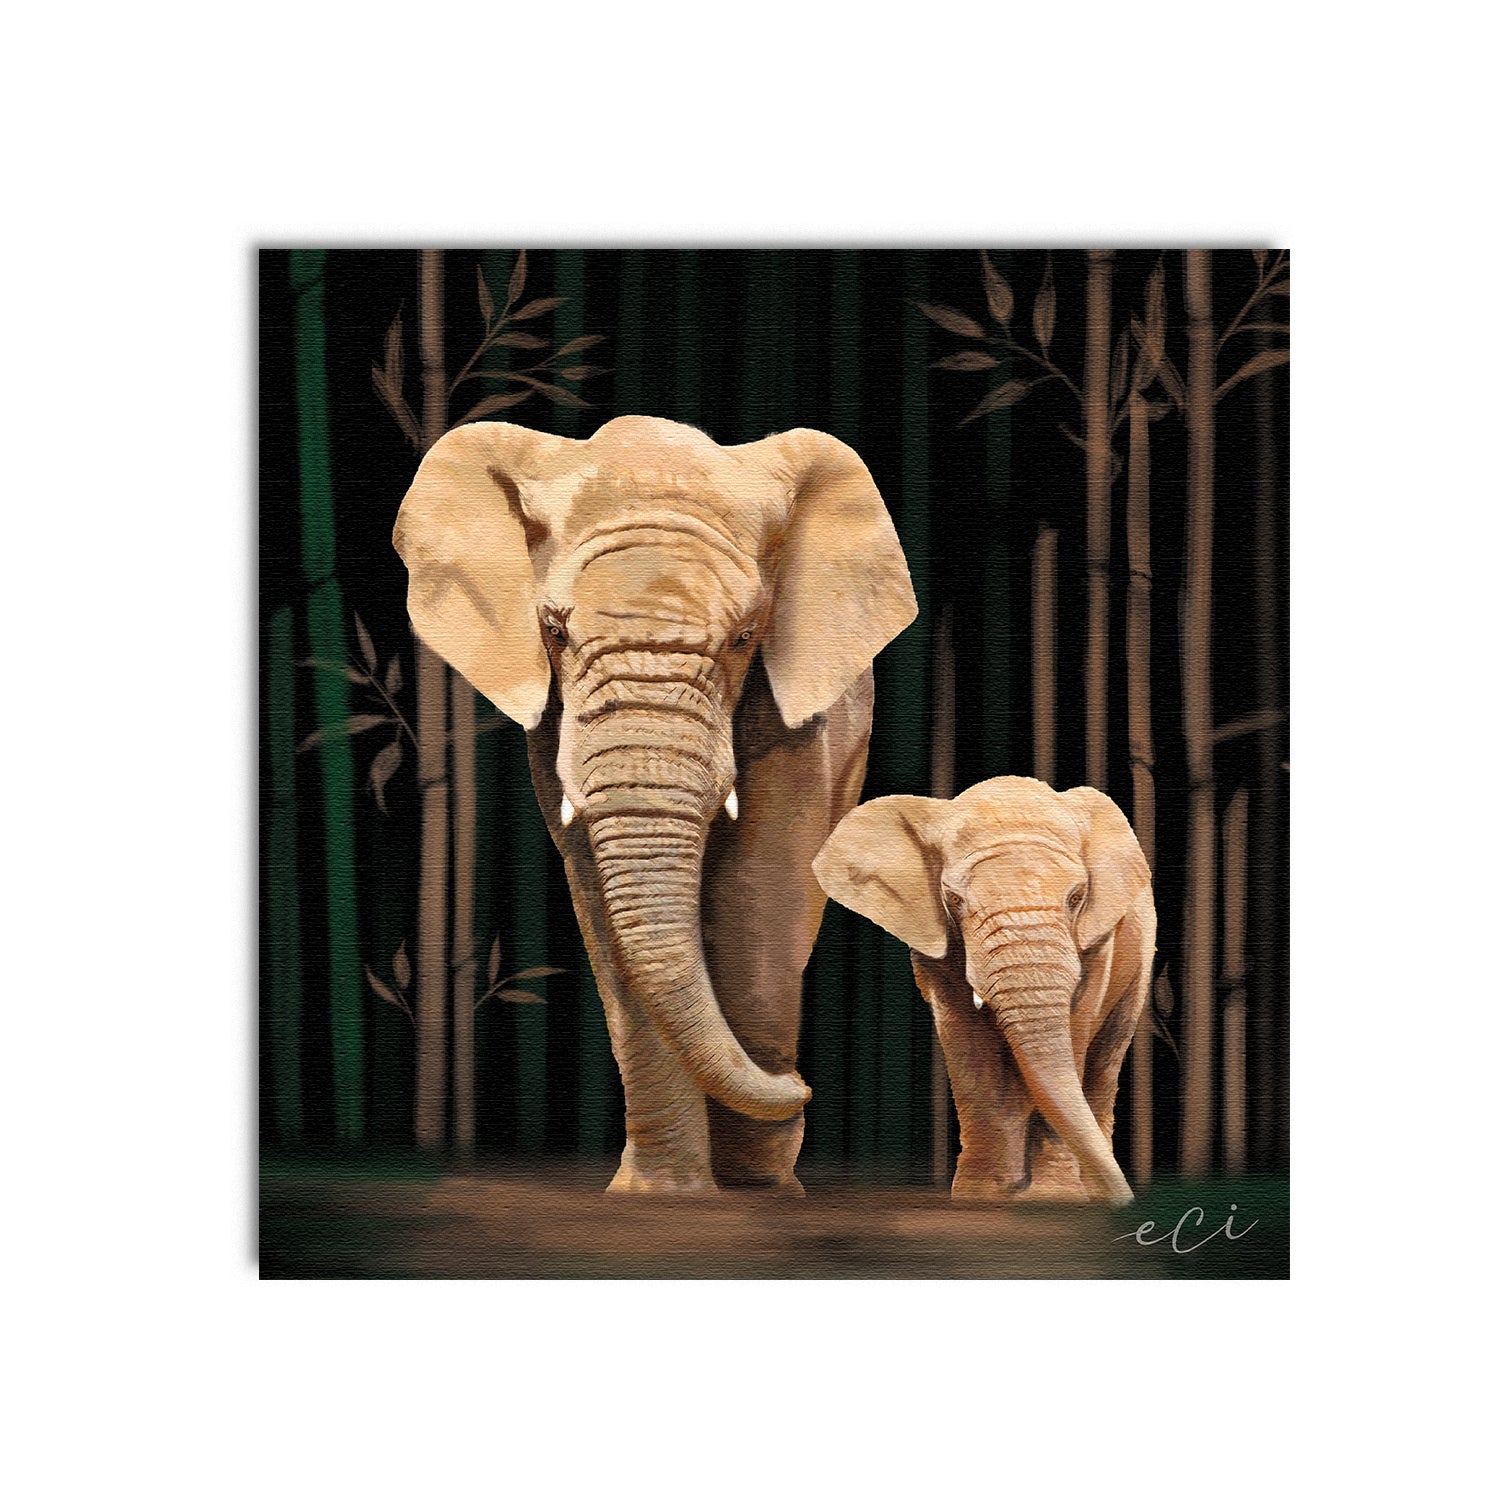 Elephant With Baby Elephant Canvas Painting Digital Printed Animal Wall Art